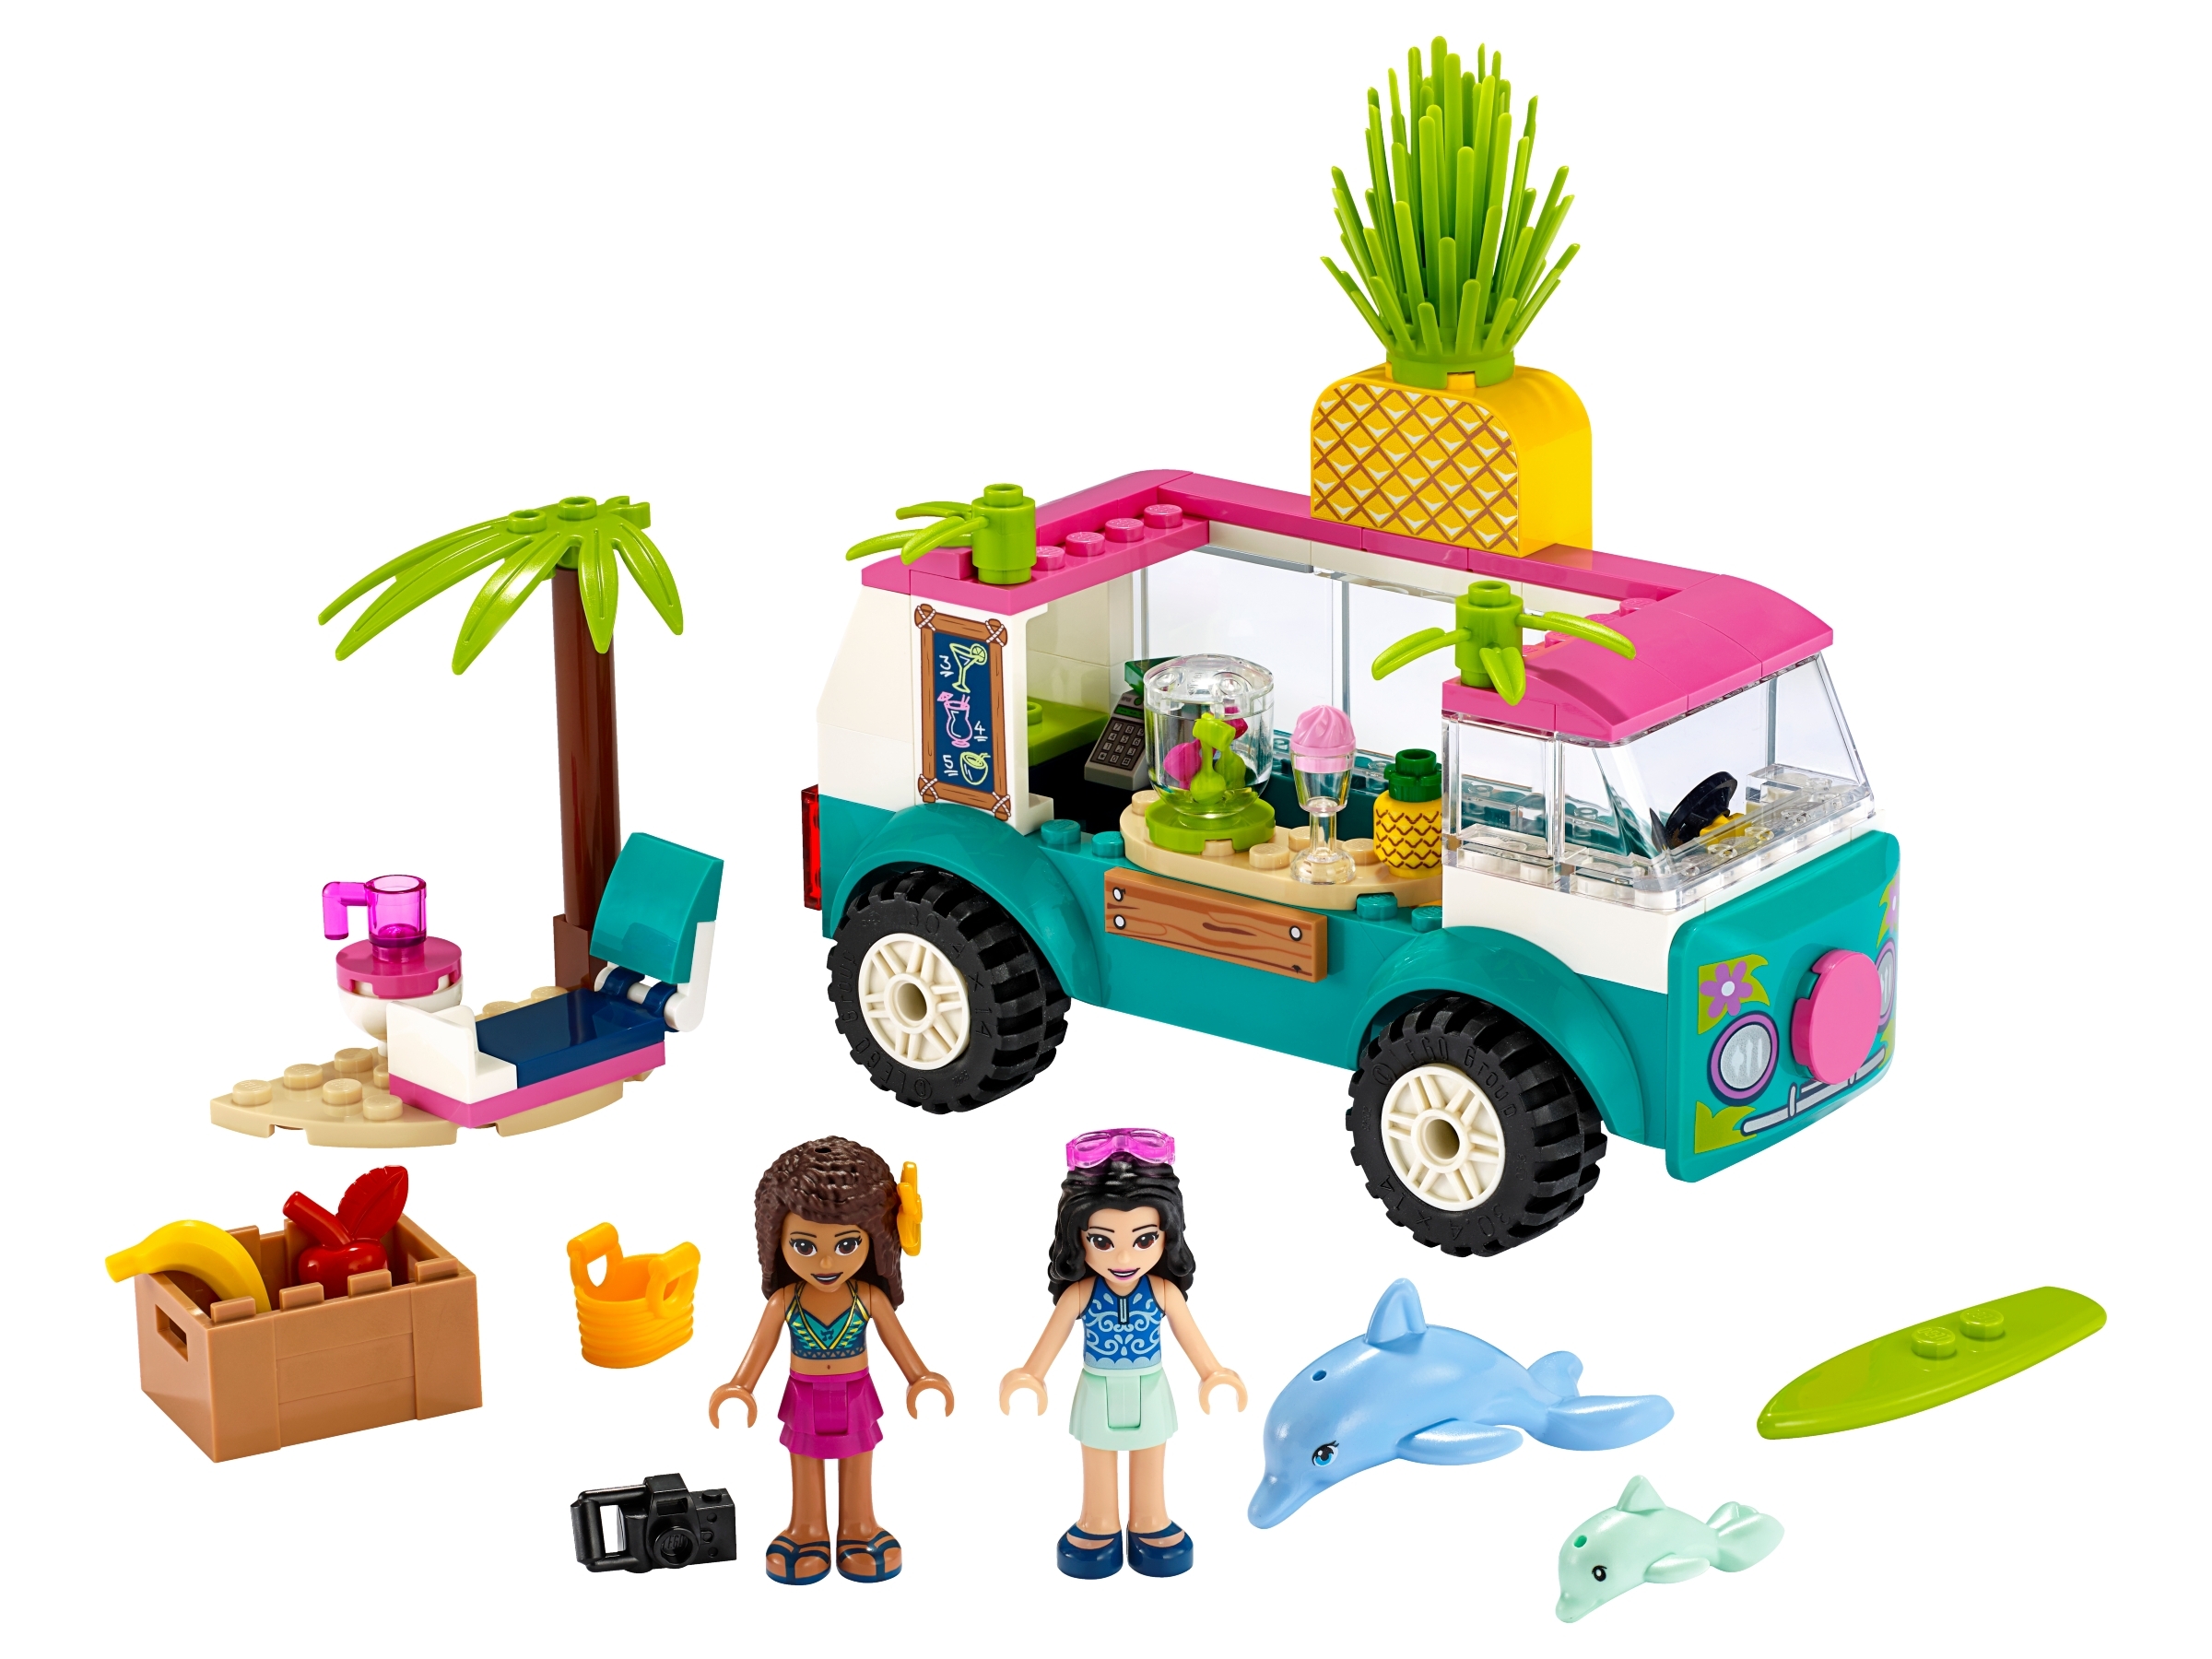 lego friends easy to build